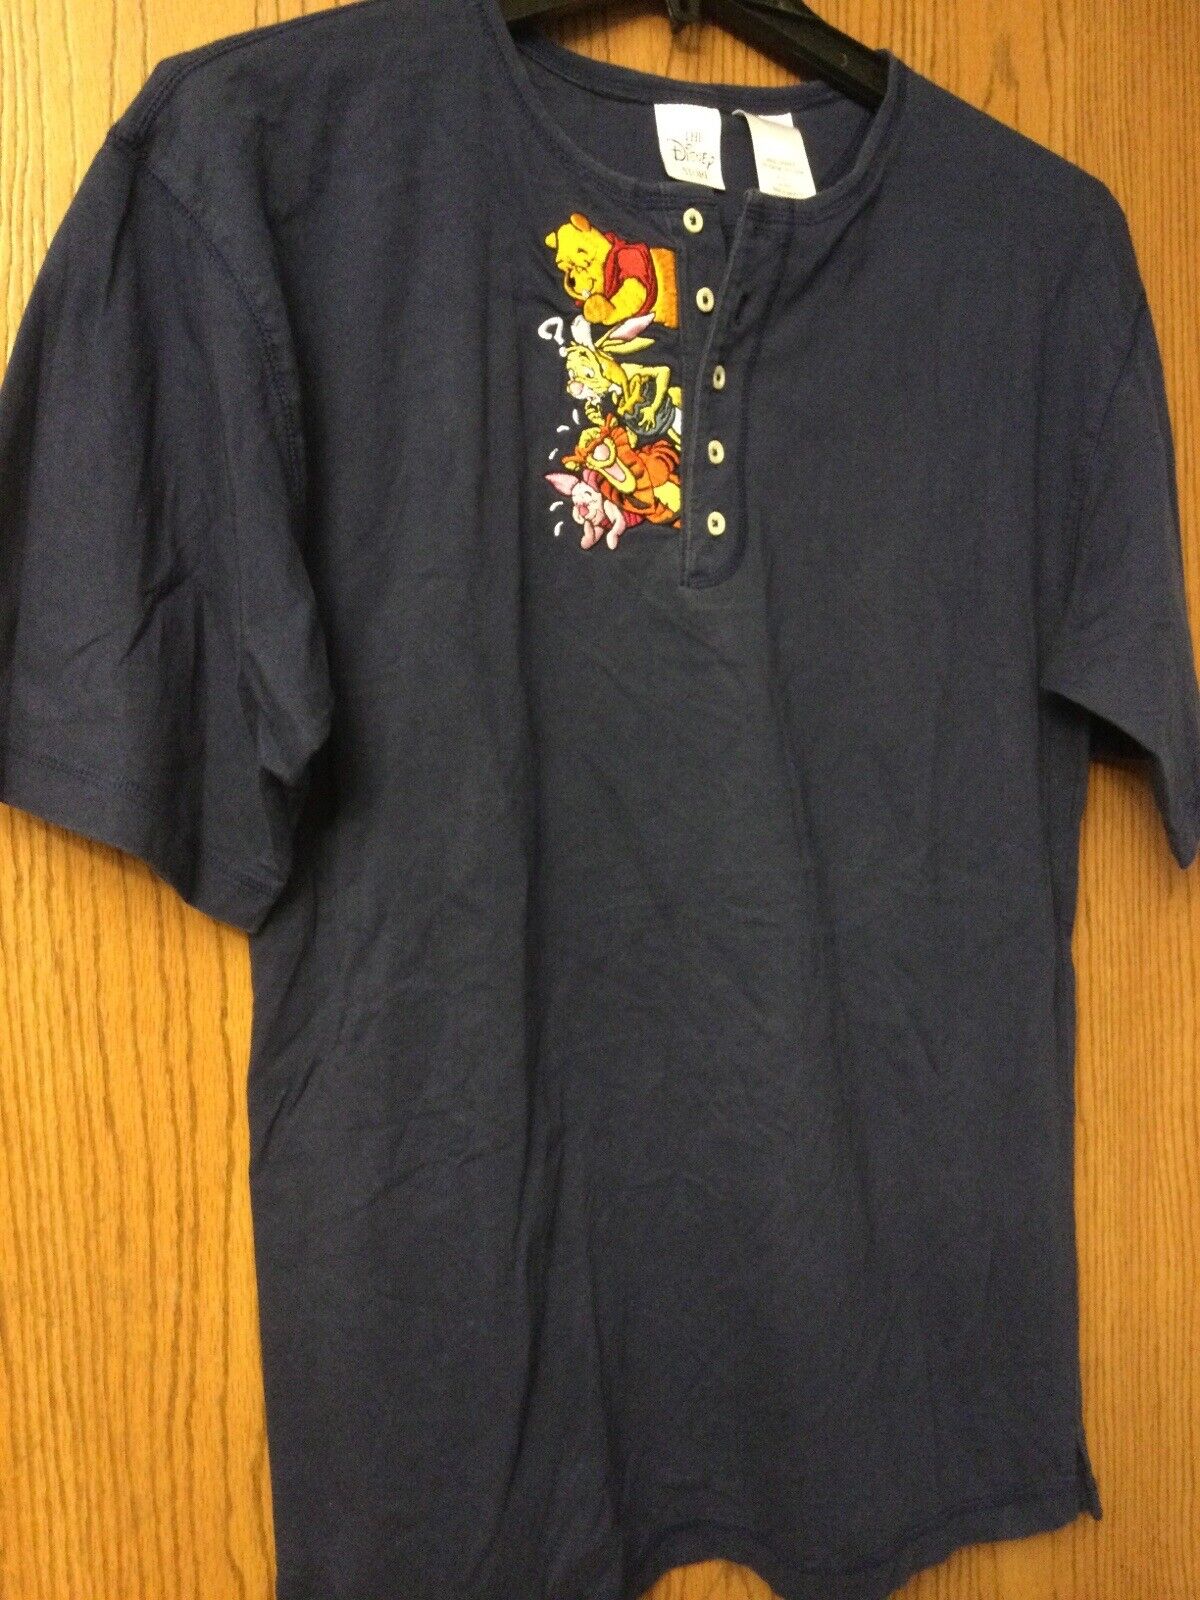 Winnie The Pooh Characters - 5 Top Blue Max 62% OFF Shirt L. Button Free shipping / New